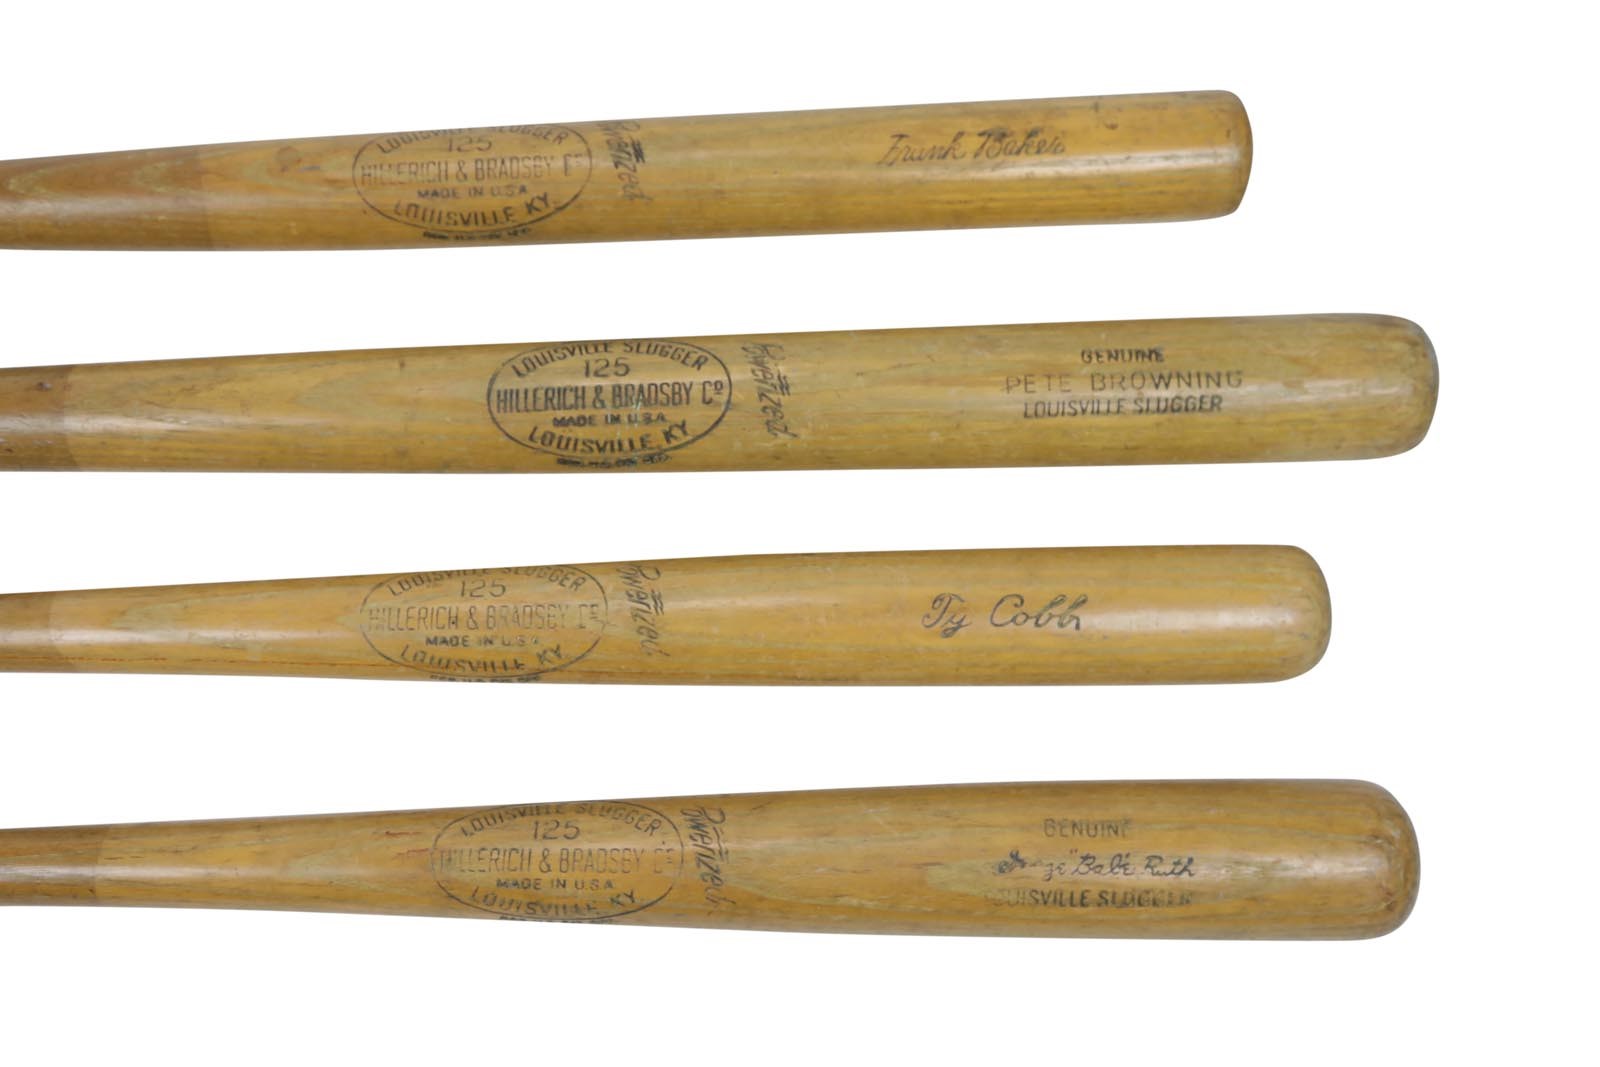 1962 Roger Maris Used Batting Experiment Bats (Browning, Cobb, Baker and Ruth-all PSA)